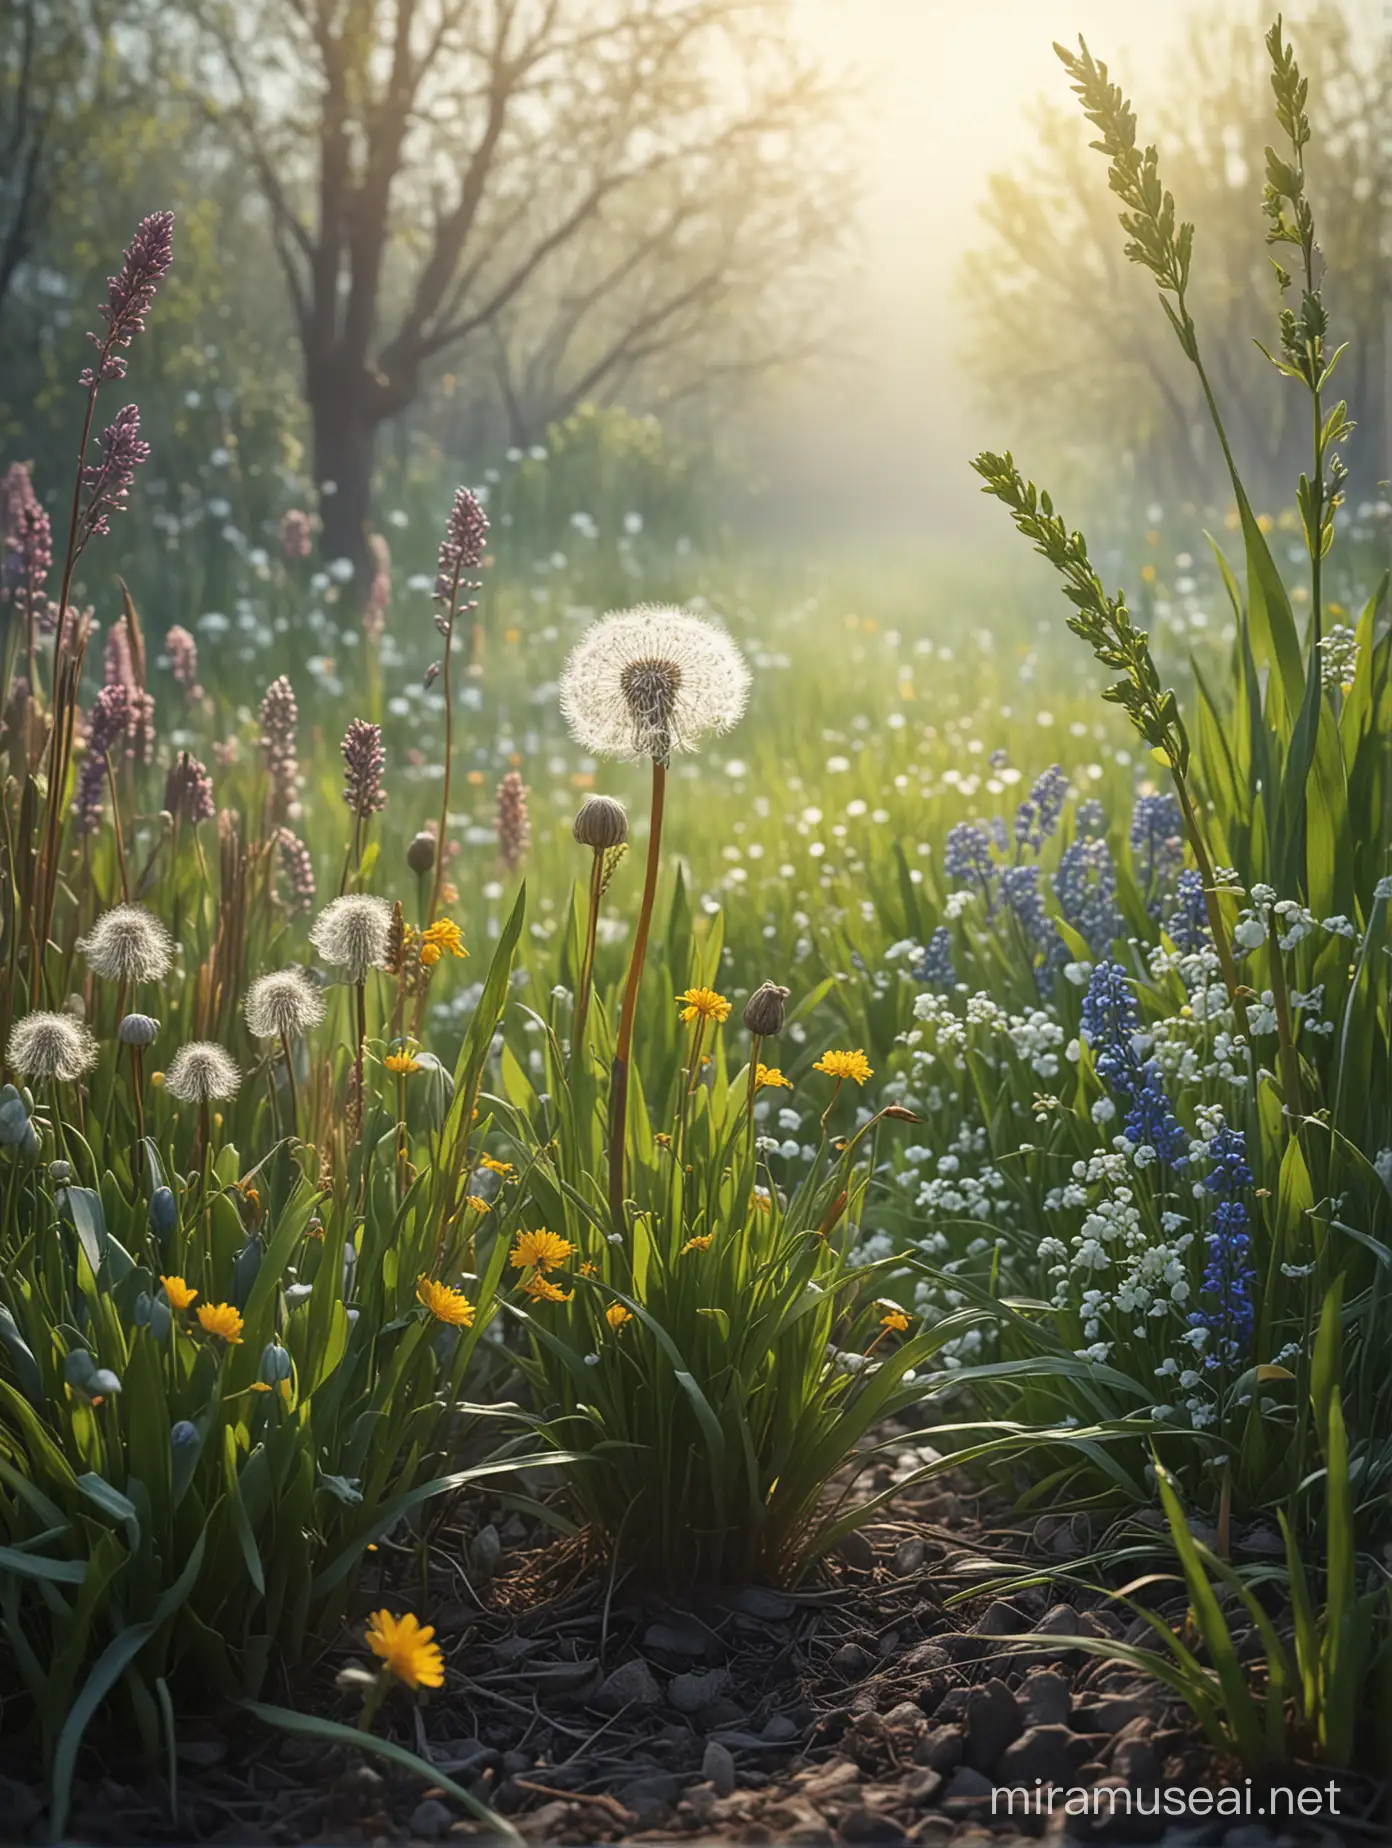 dandelion, hyacinth, lily of the valley, saffron, willow buds, grass... all in the foreground. The background is hazy, bright, fantasy style, realistic digital photography